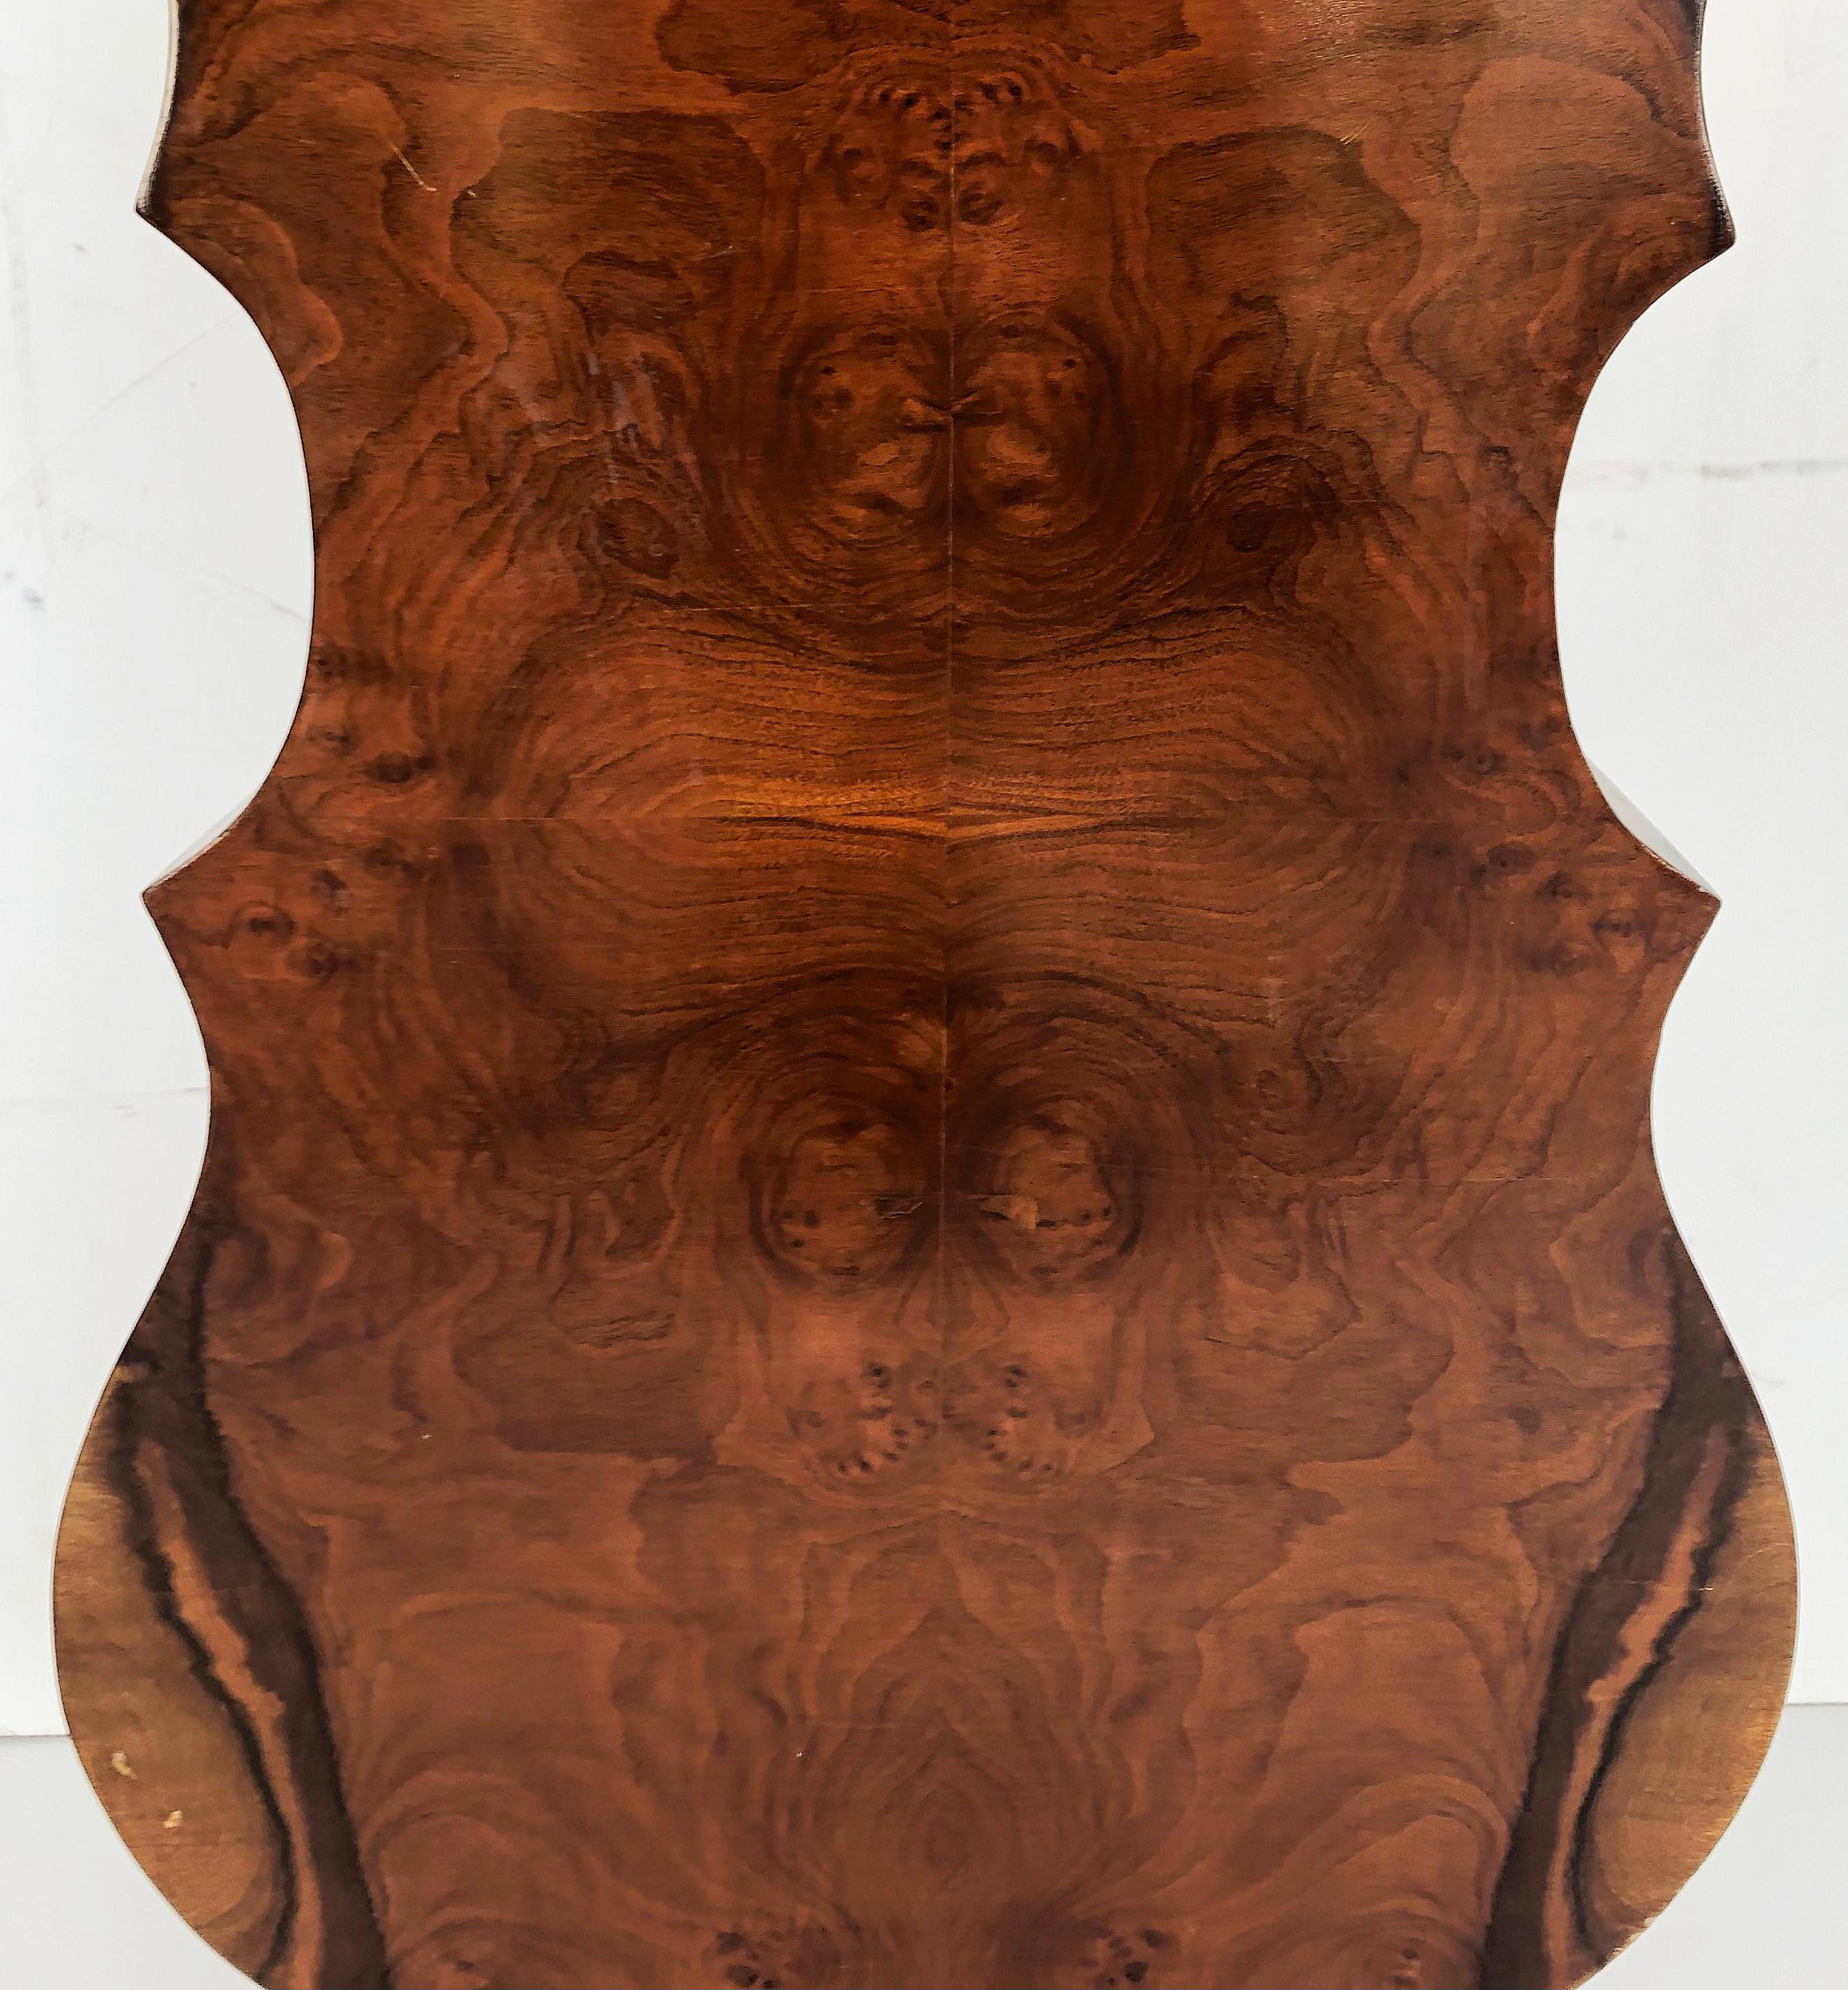 Art Deco-Style Whimsical Burl Wood Cello Shaped Cabinet with Secret Compartment 6